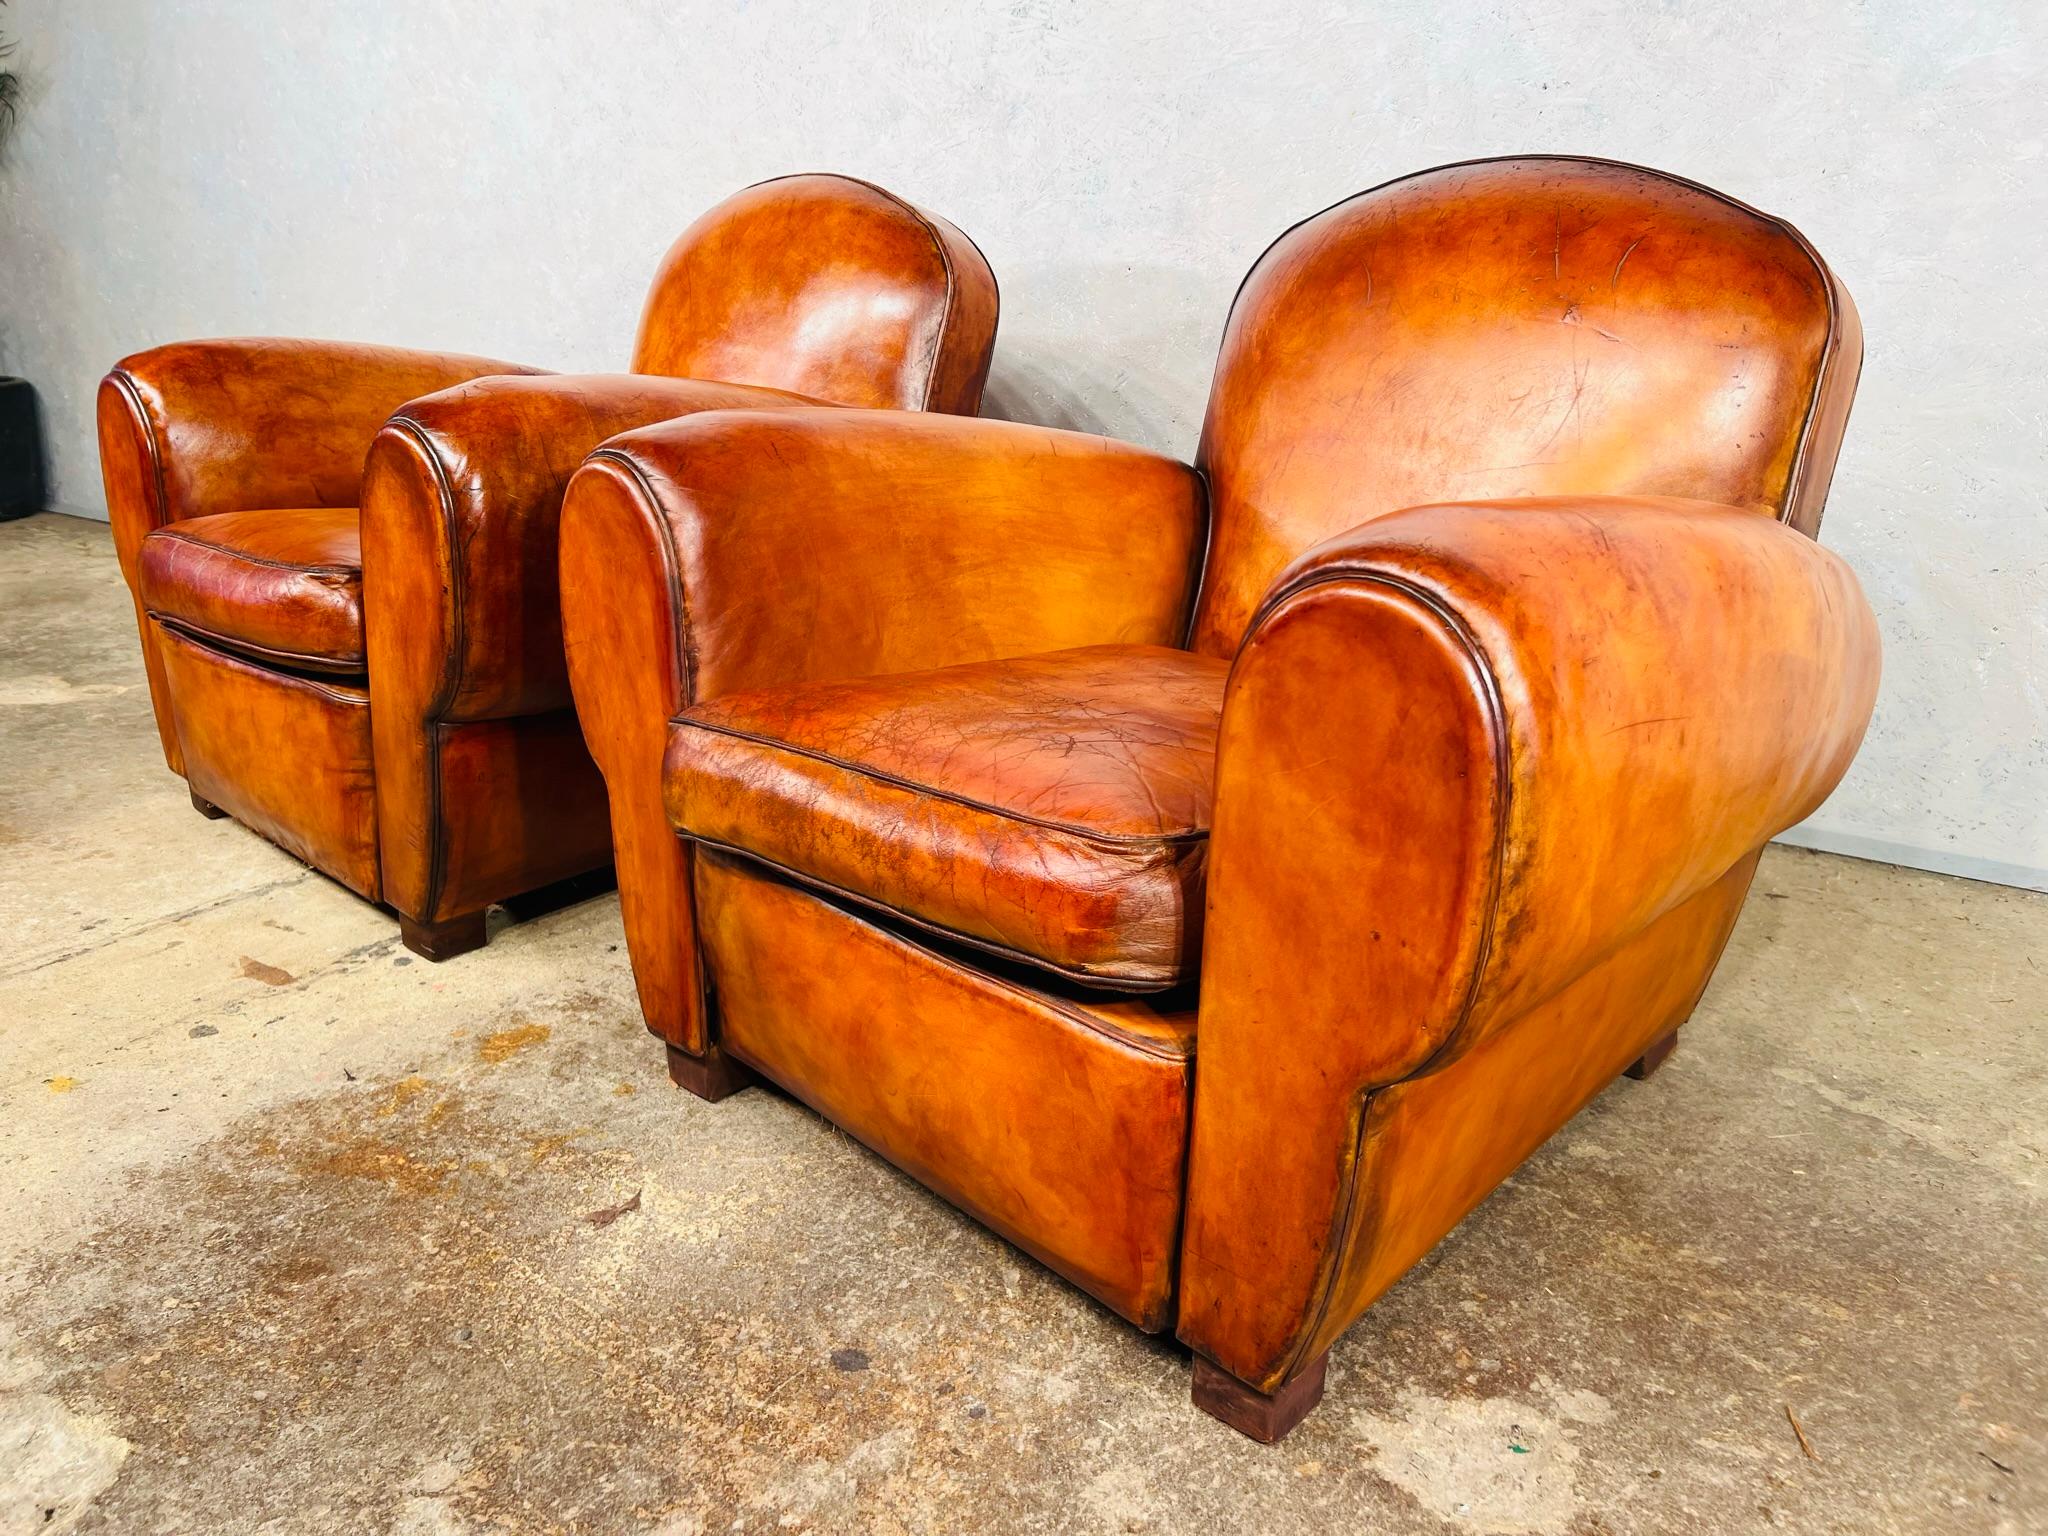 Stunning Pair of Leather French Club Chairs circa 1930 Patinated Cognac Color For Sale 11